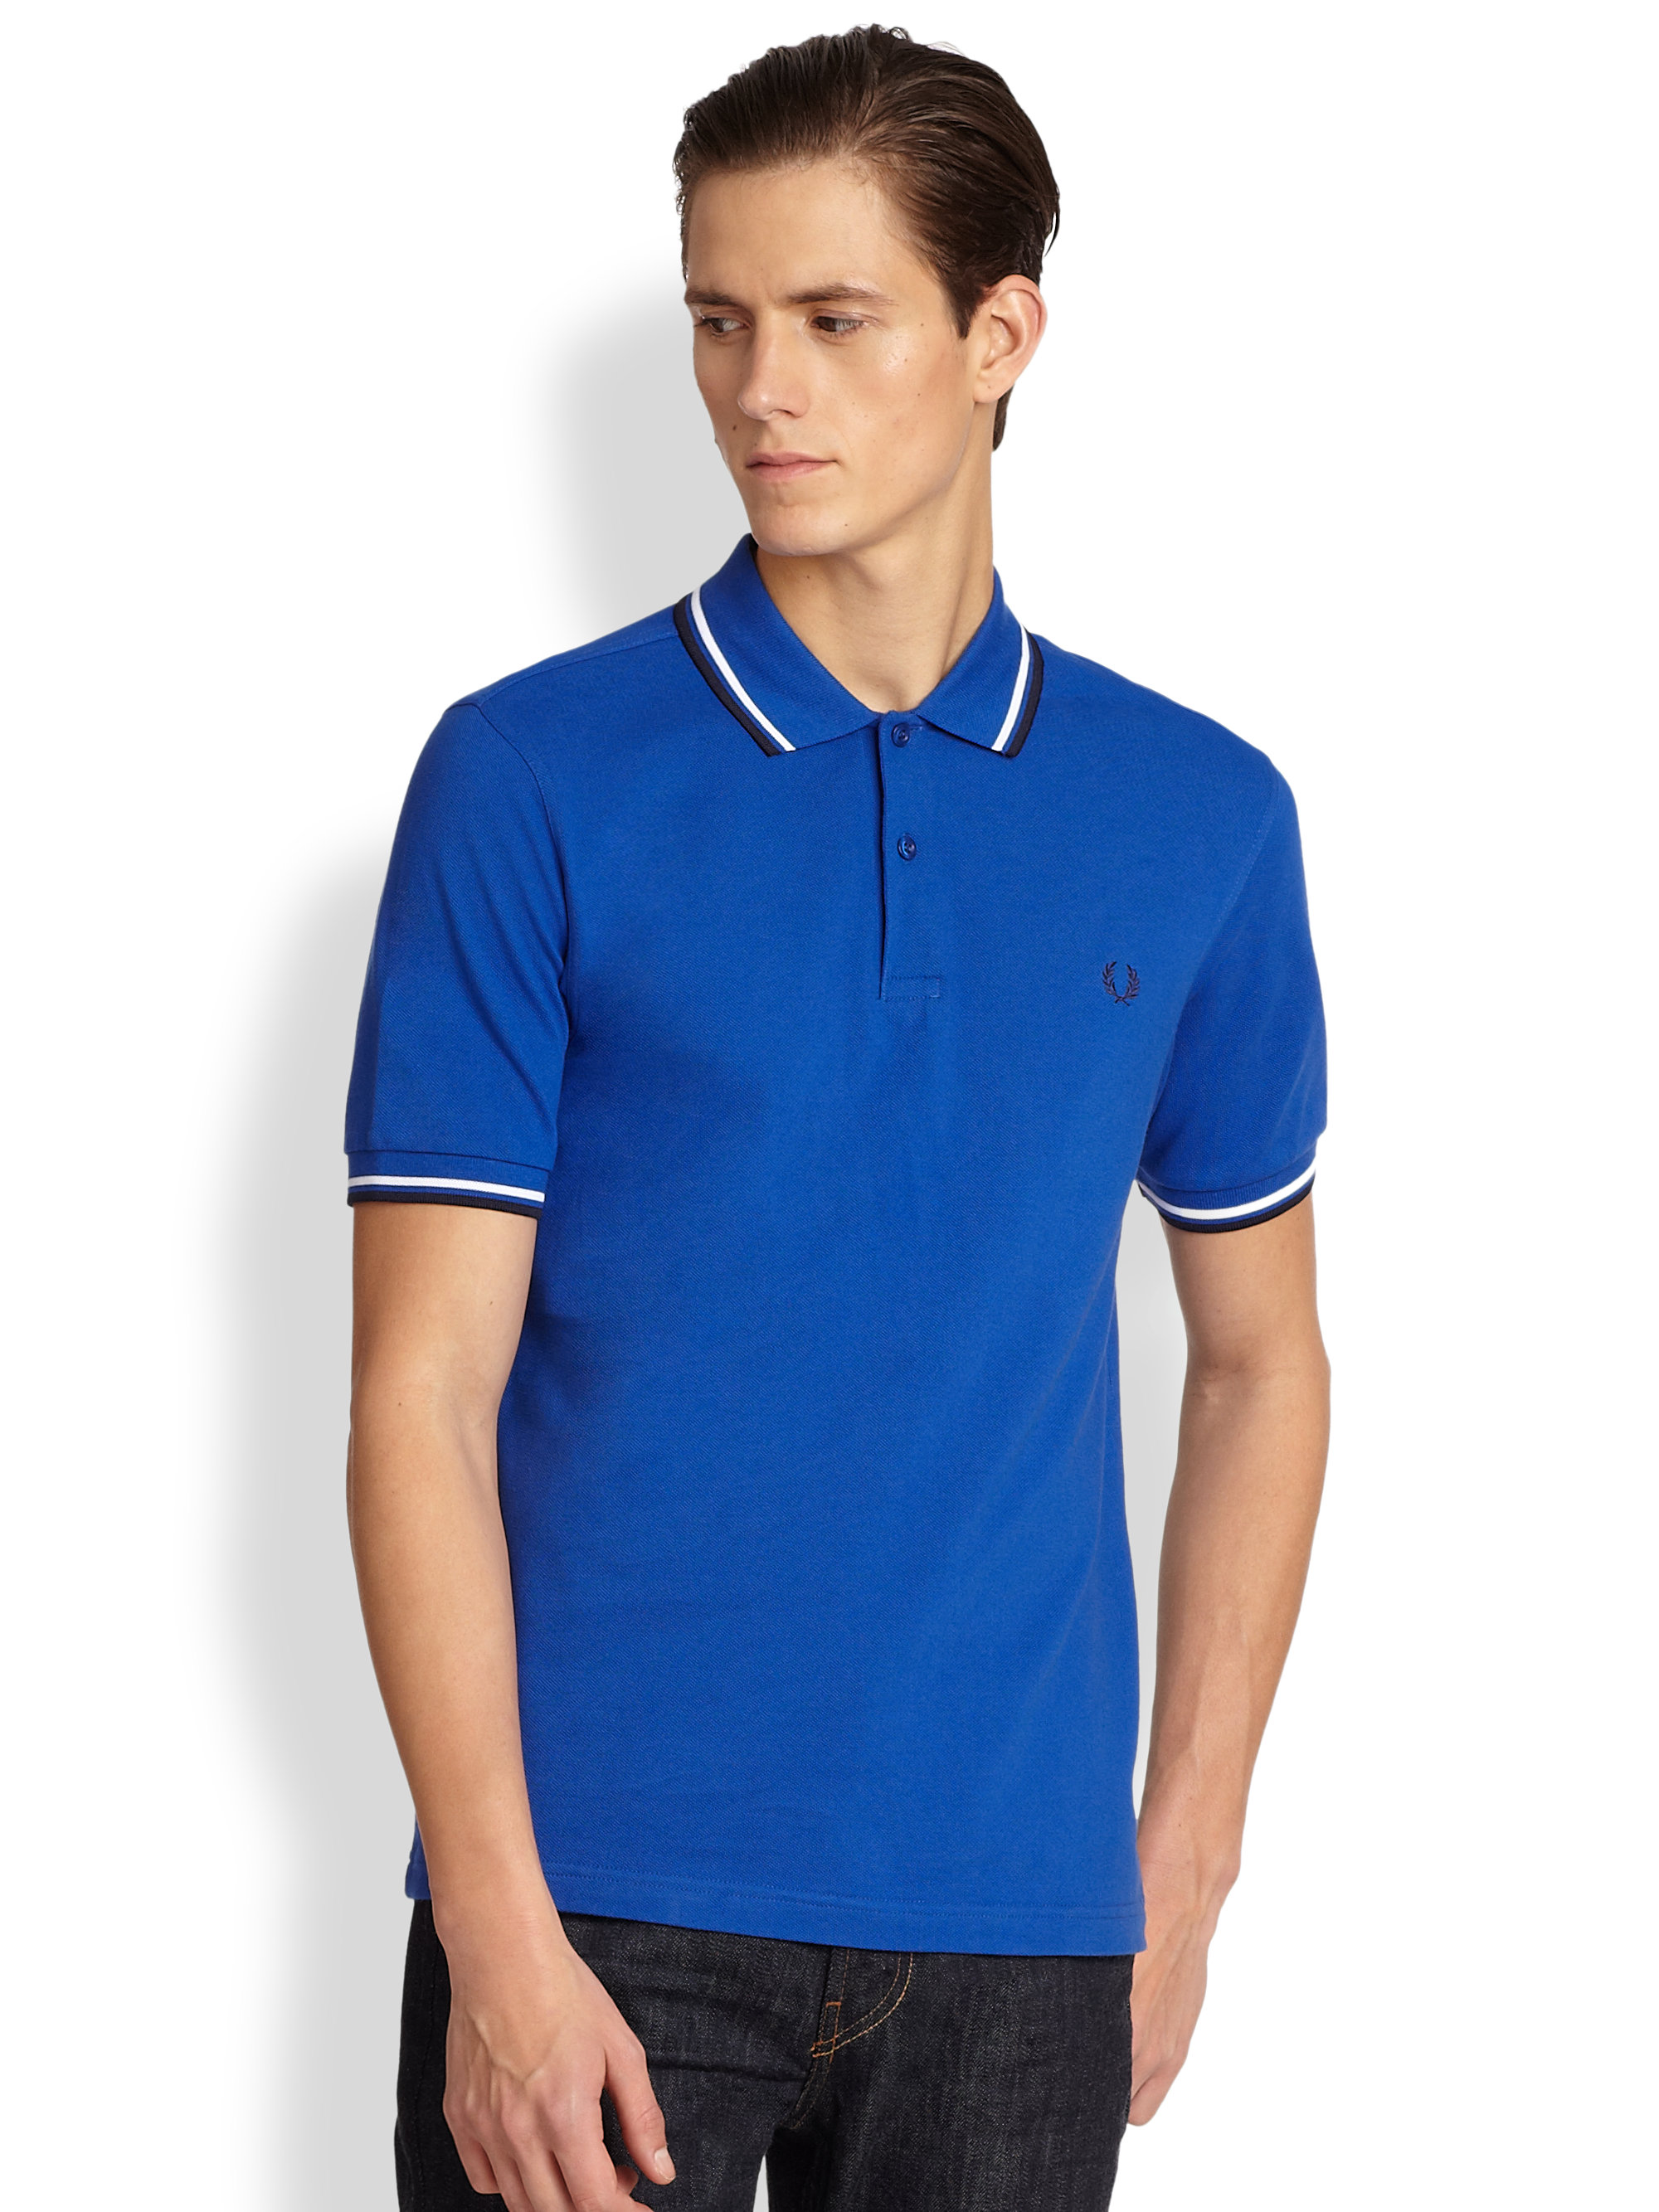 Lyst - Fred Perry Twin Tip Pique Polo Shirt in Blue for Men